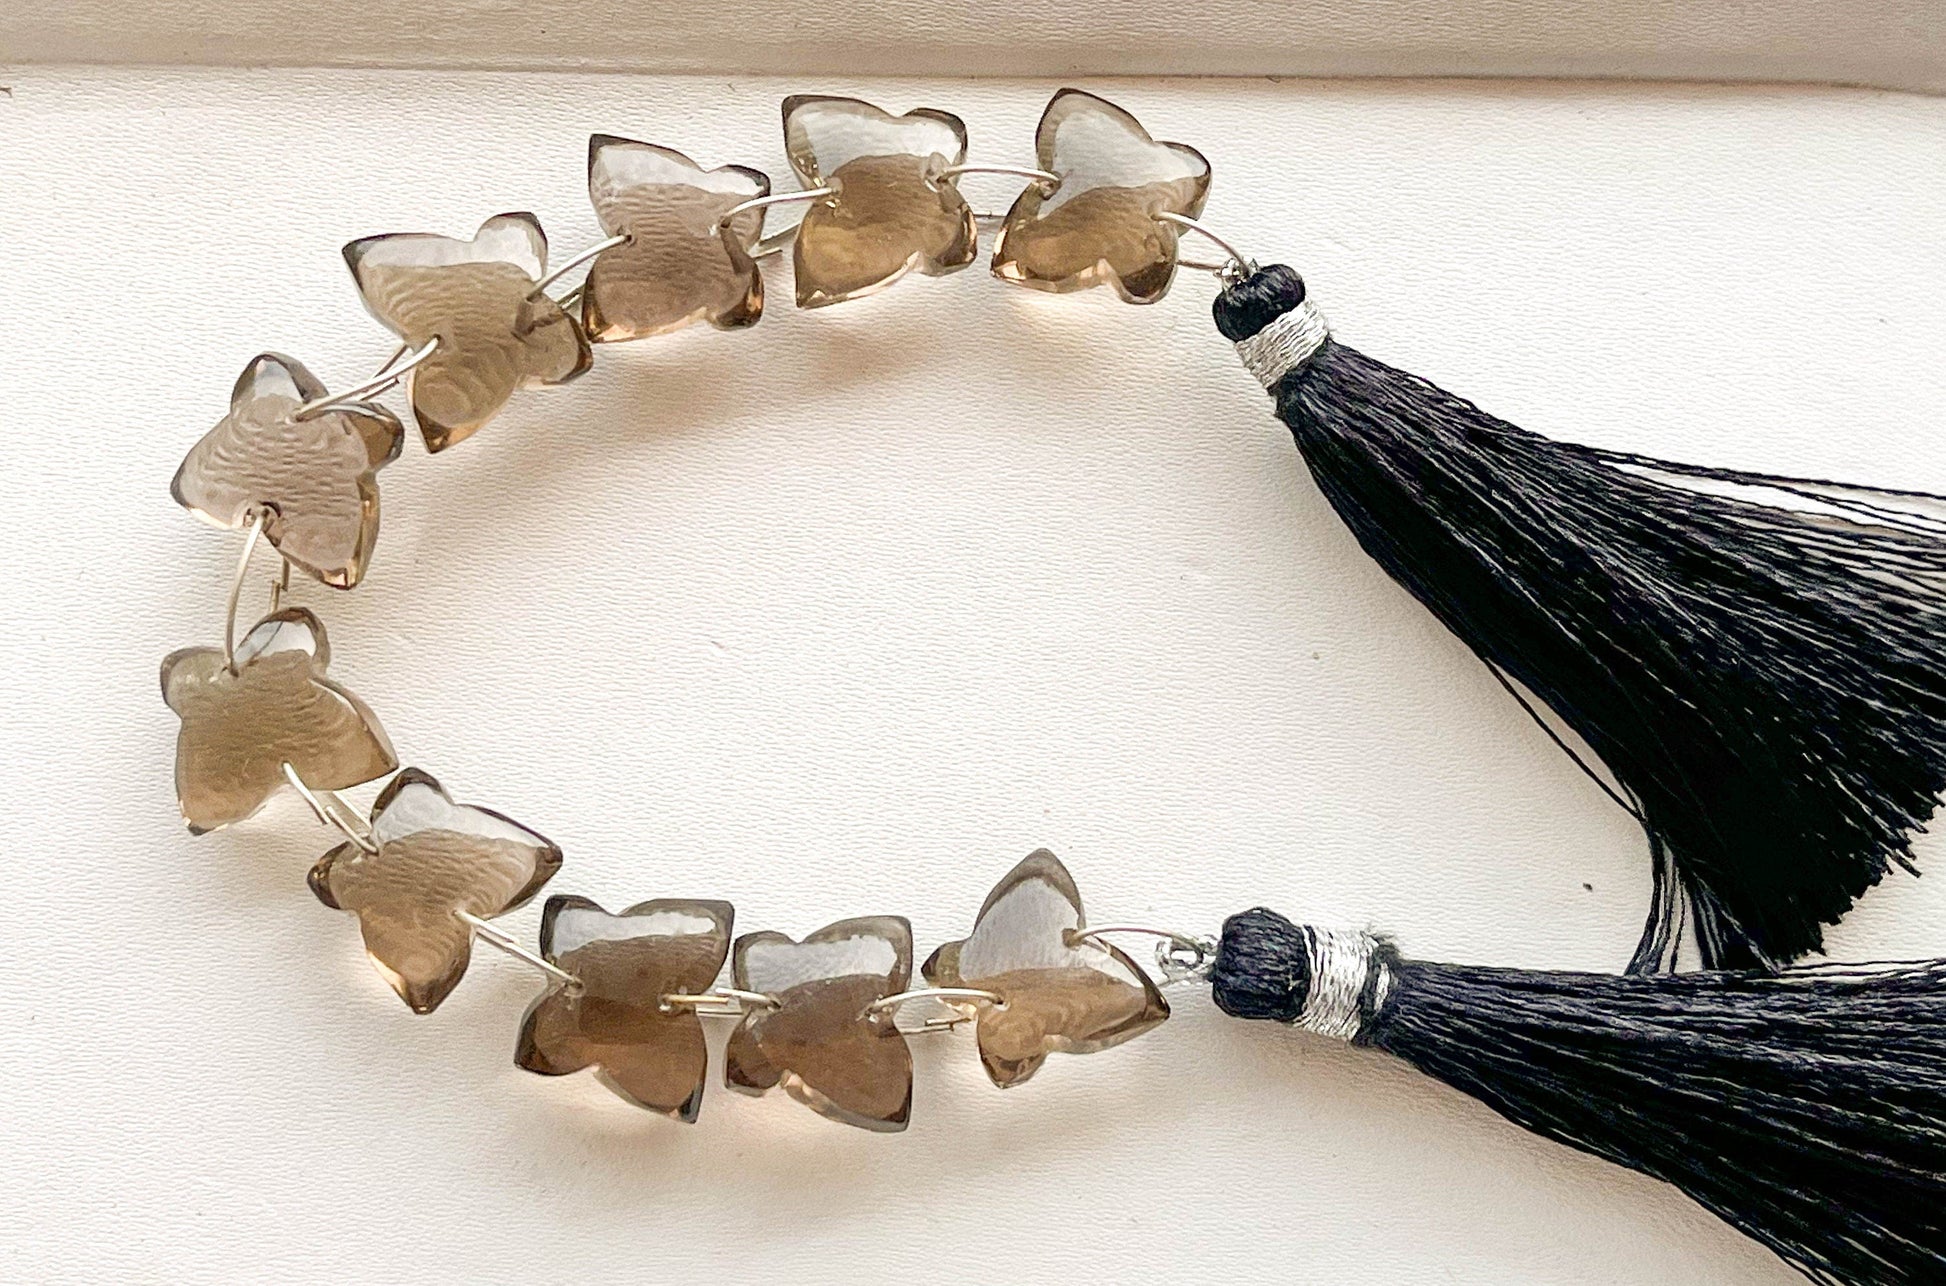 Smoky Quartz Smooth Butterfly Shape Double Drill Beads, Rare Gemstone Design for Jewelry Making, 10x12mm, 10 Pieces String Beadsforyourjewelry